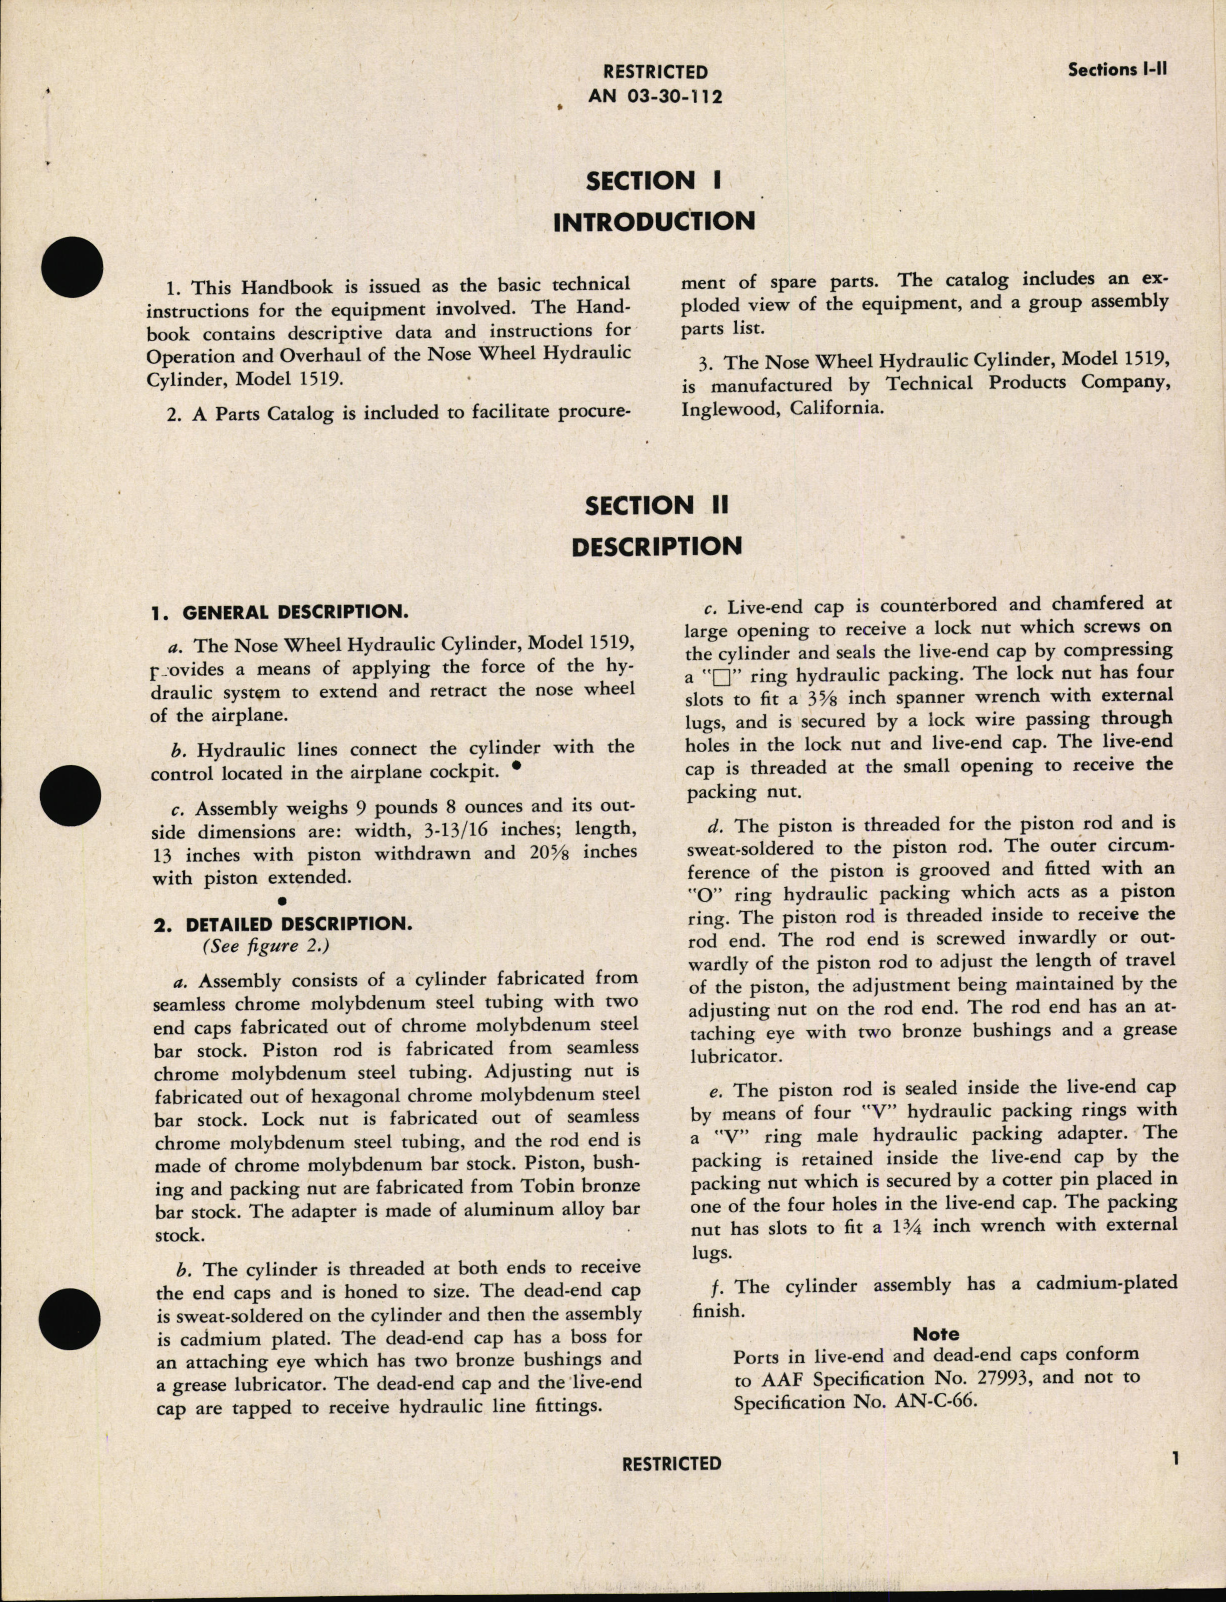 Sample page 5 from AirCorps Library document: Handbook of Instructions with Parts Catalog for Nose Wheel Hydraulic Actuating Cylinder